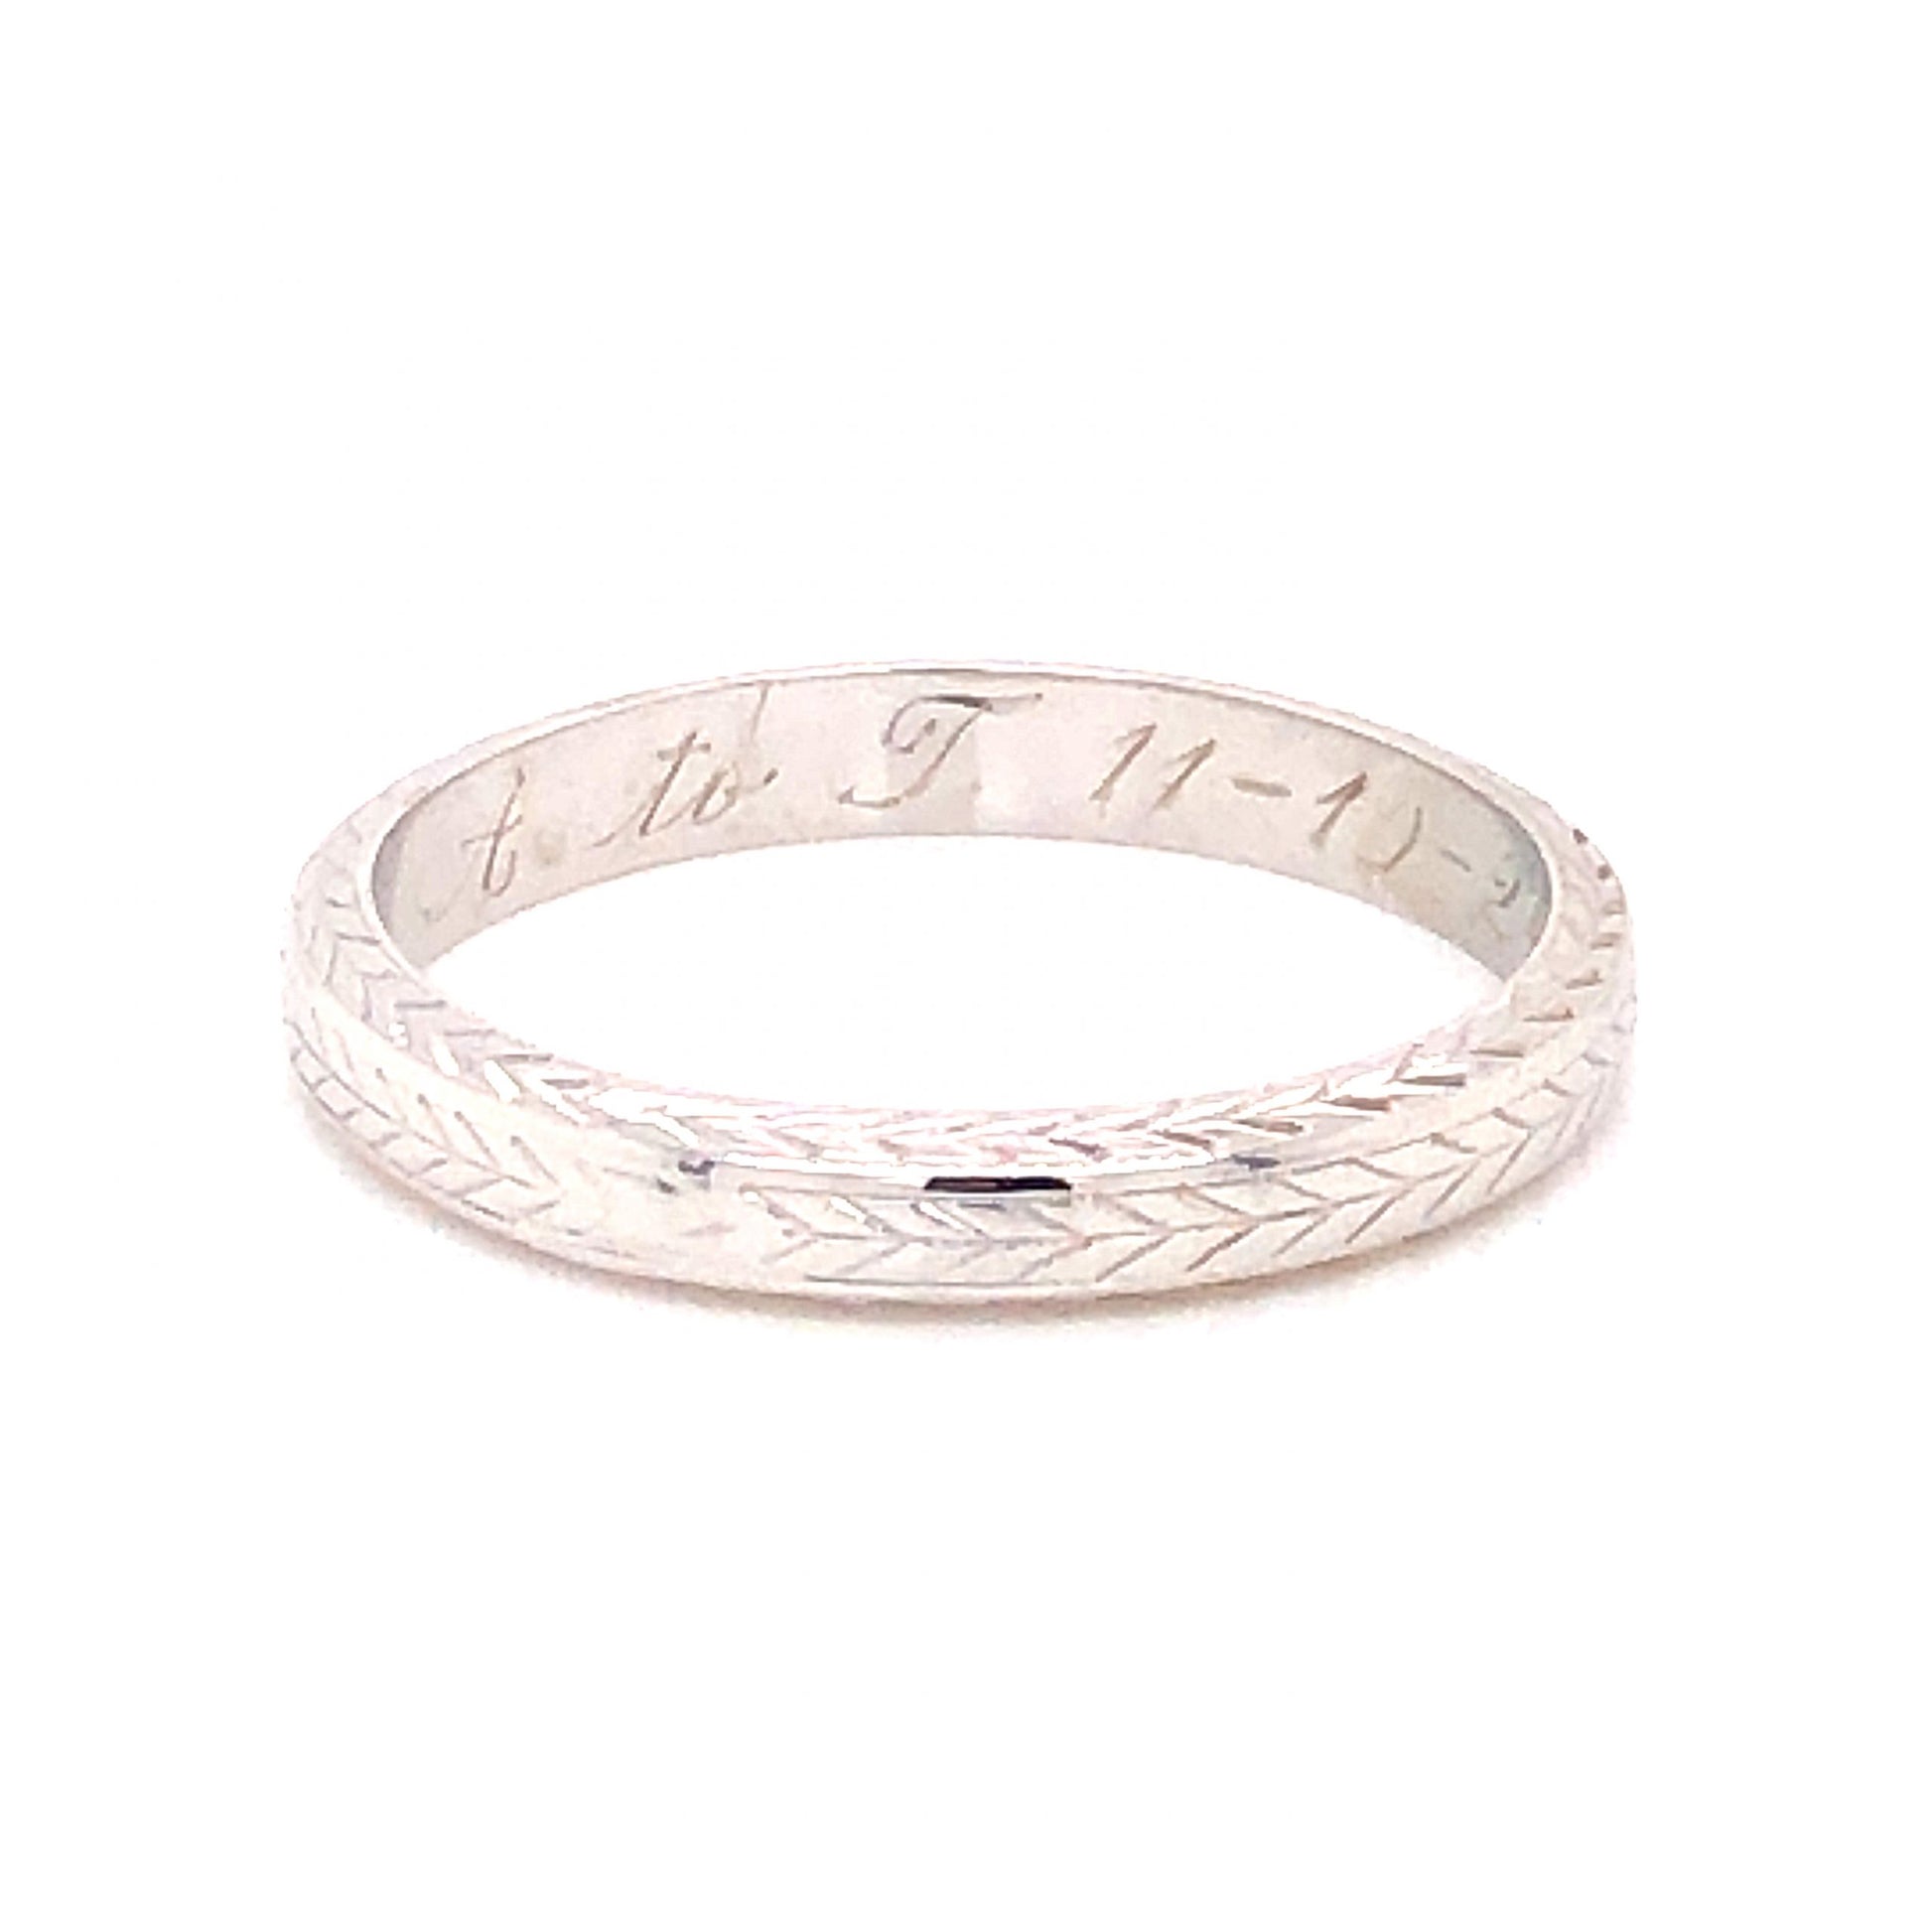 3mm Art Deco Chevron Wedding Band in 18k White GoldComposition: Platinum Ring Size: 7.25 Total Gram Weight: 3.2 g Inscription: BELAIS 18K, A. to T. 11-10-29
      